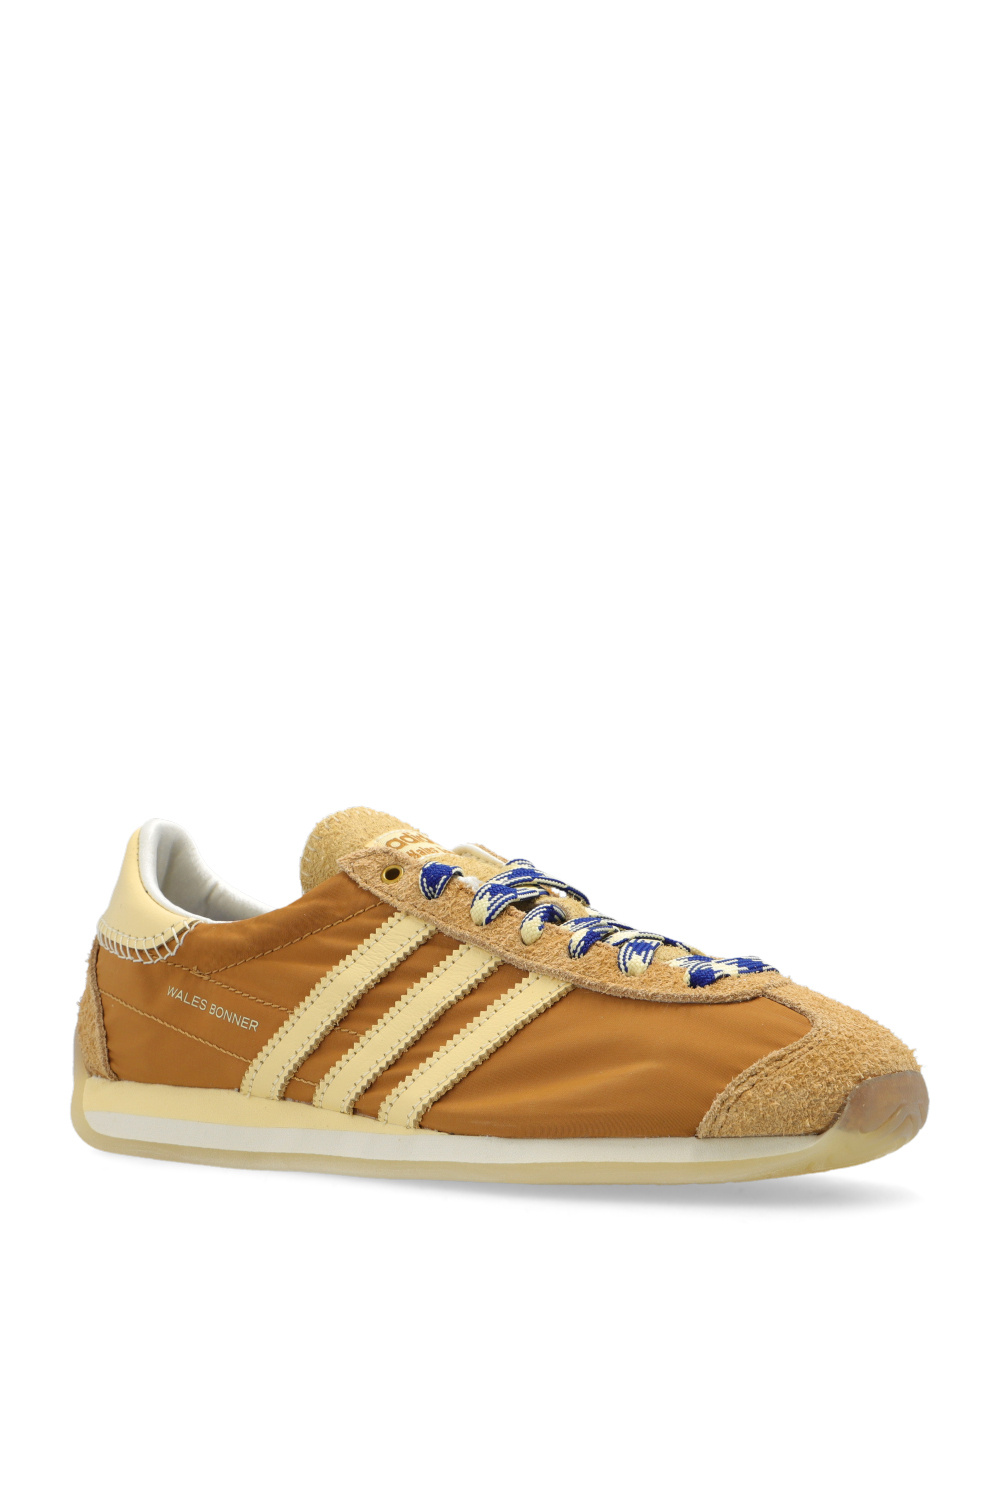 ADIDAS Originals ADIDAS Originals adidas benefits for customers employees jobs